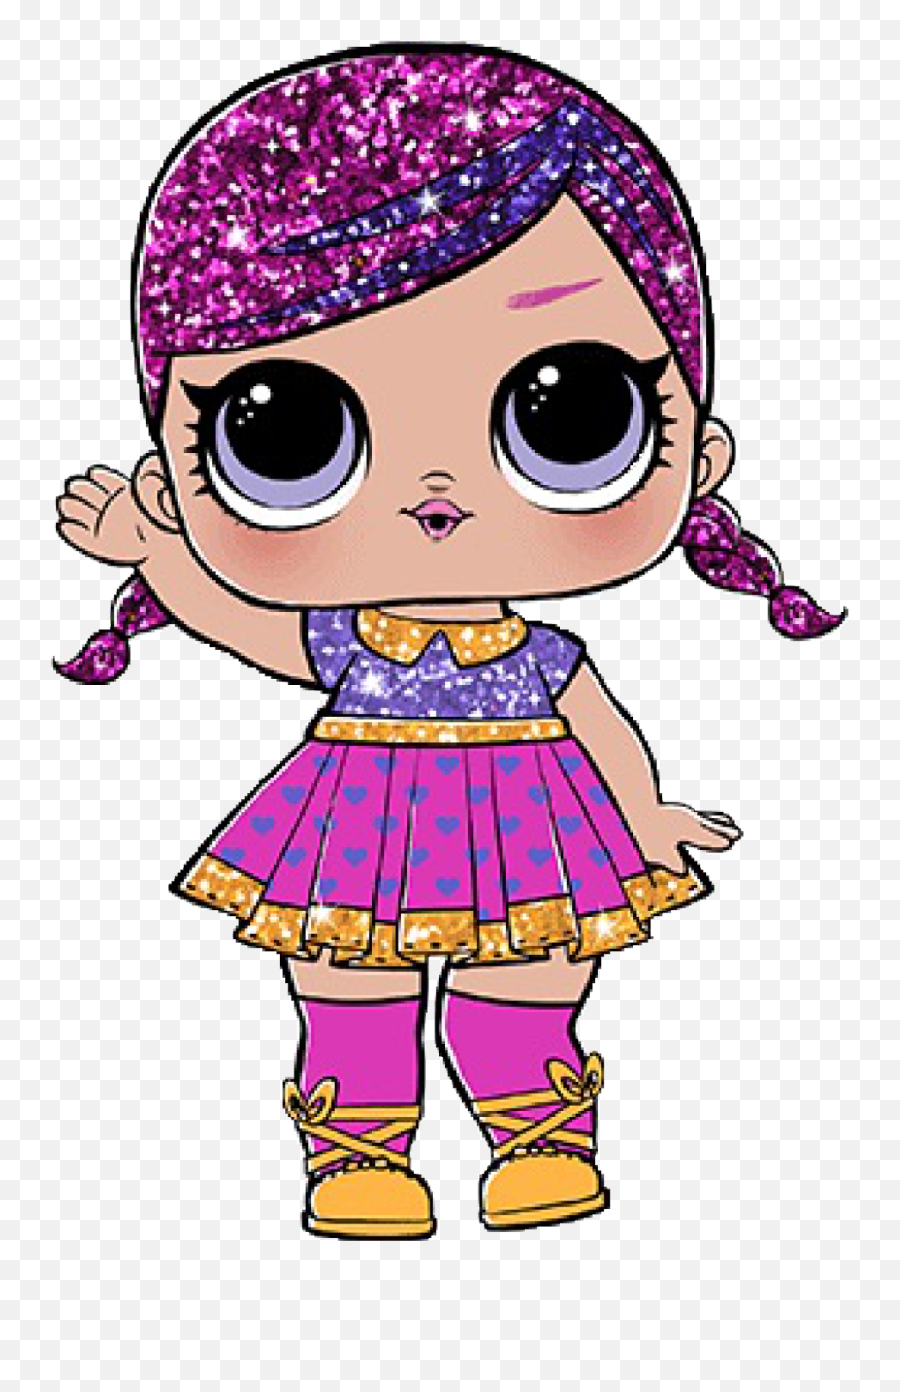 Baby Lol Doll Clipart Png Download - Transparent Background Lol ...